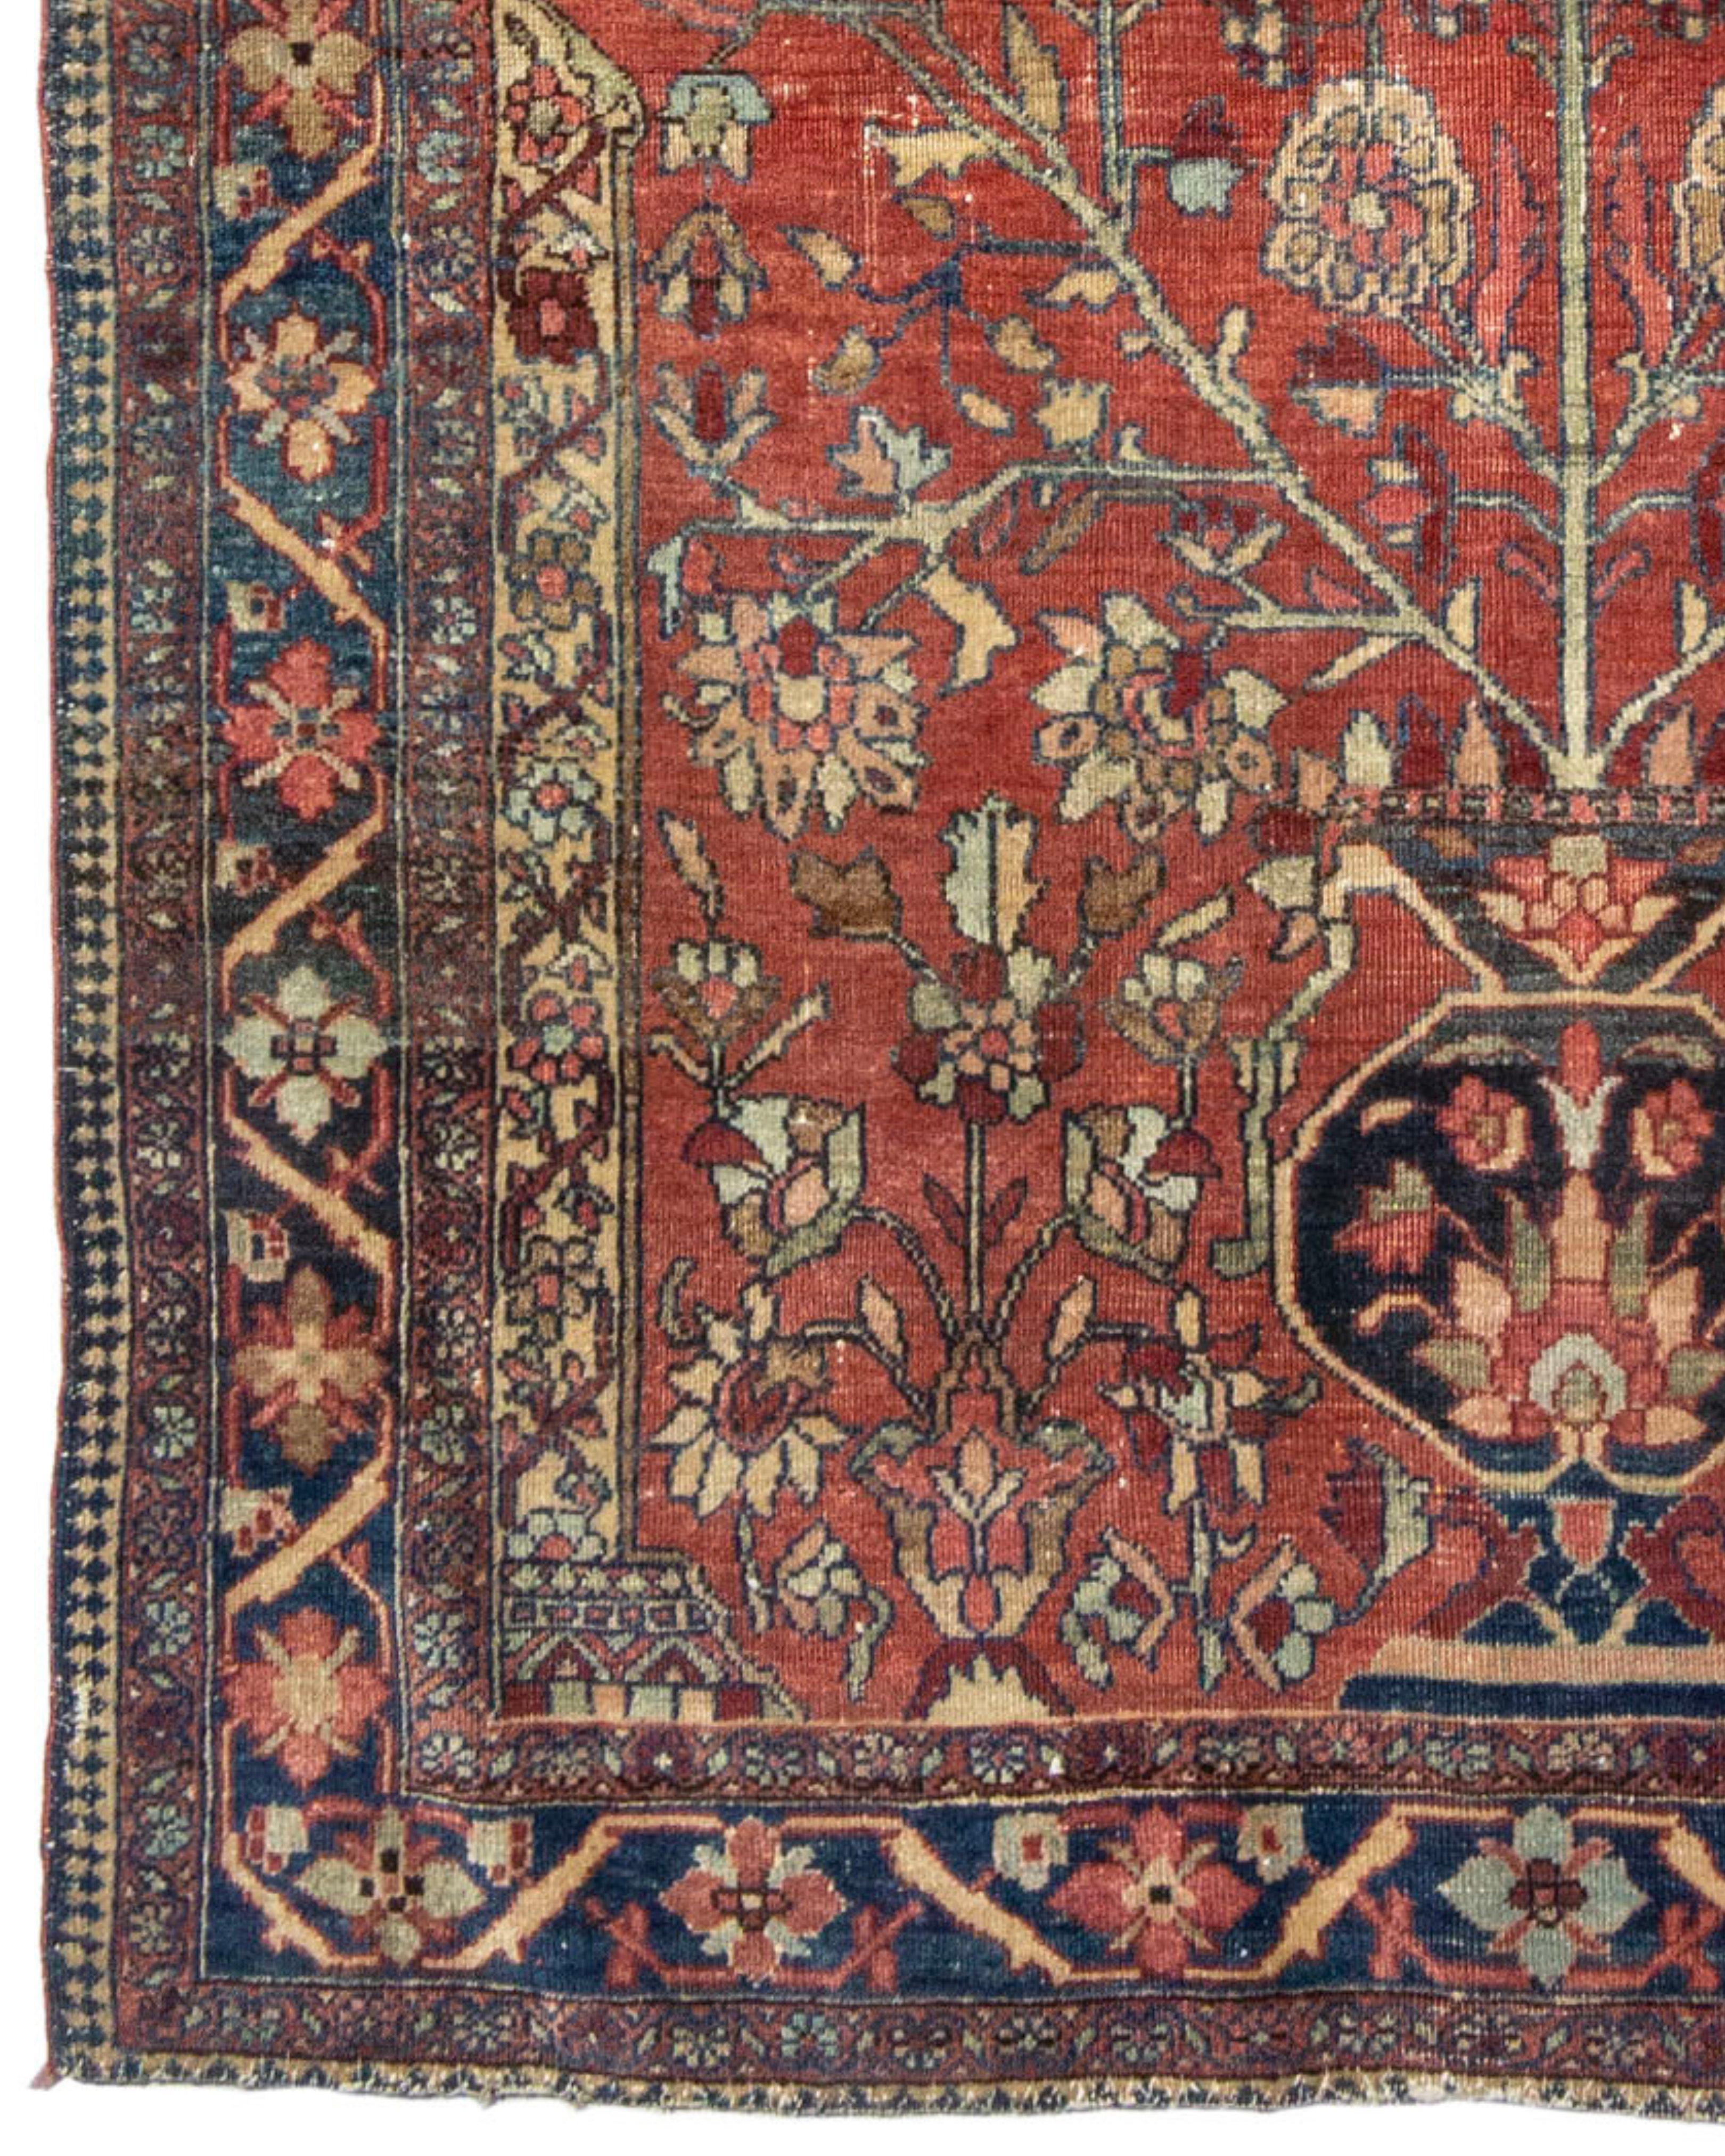 Antique Persian Fereghan Sarouk Rug, Late 19th Century In Good Condition For Sale In San Francisco, CA